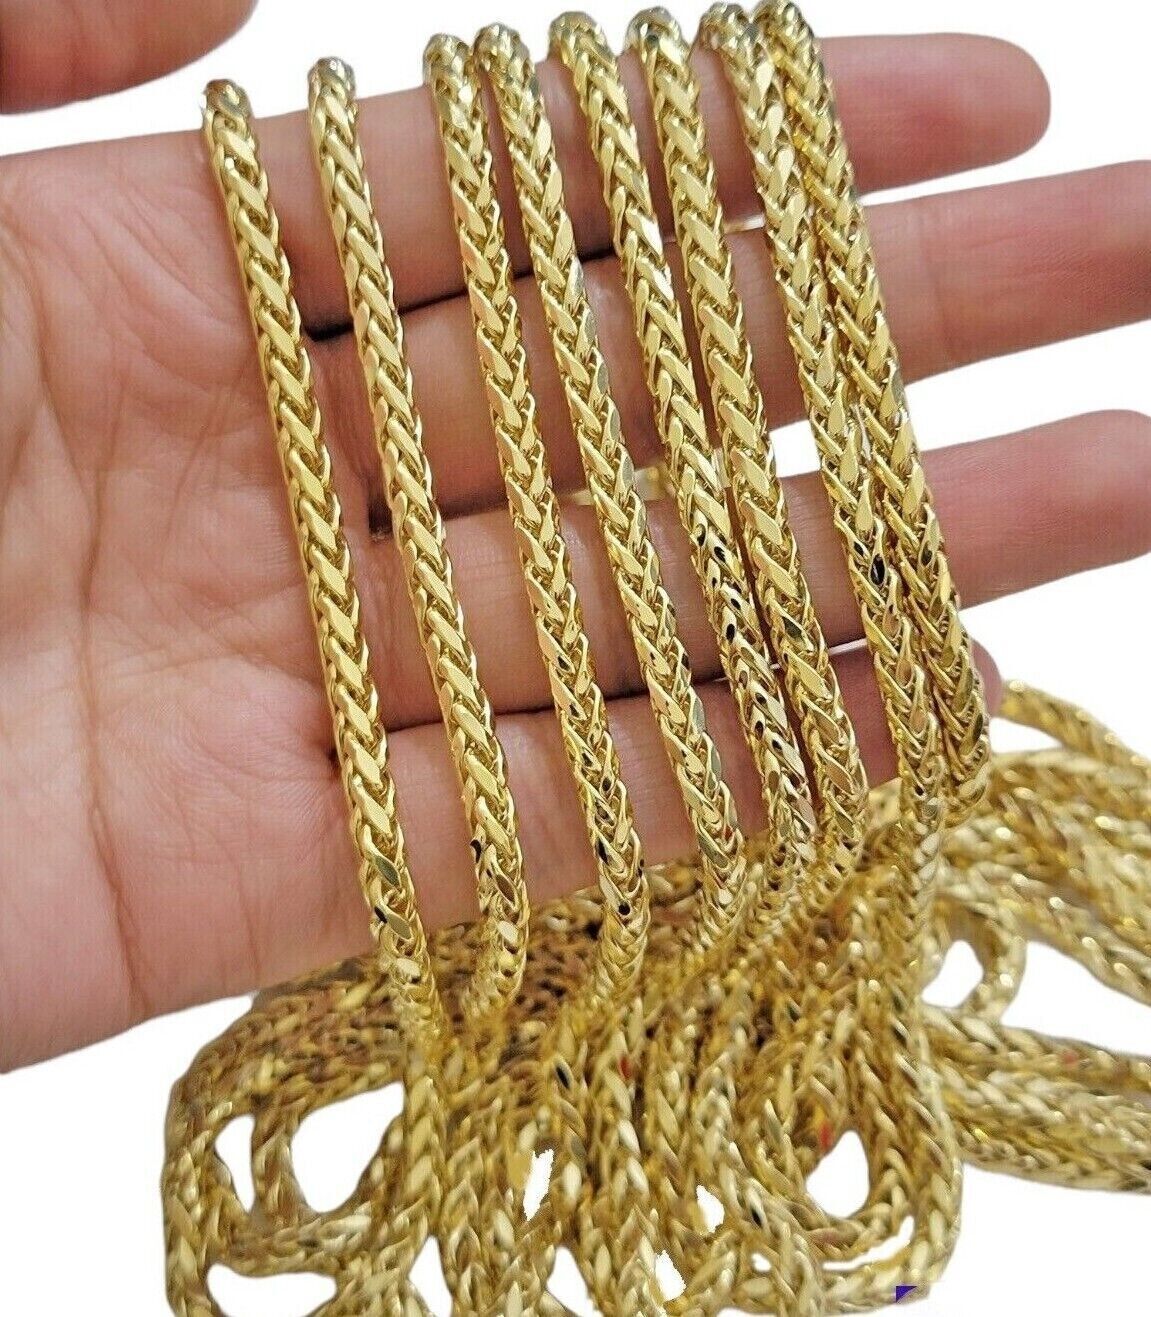 Real 10K Yellow Gold 5mm Wheat Palm Franco Spiga Chain Necklace 16